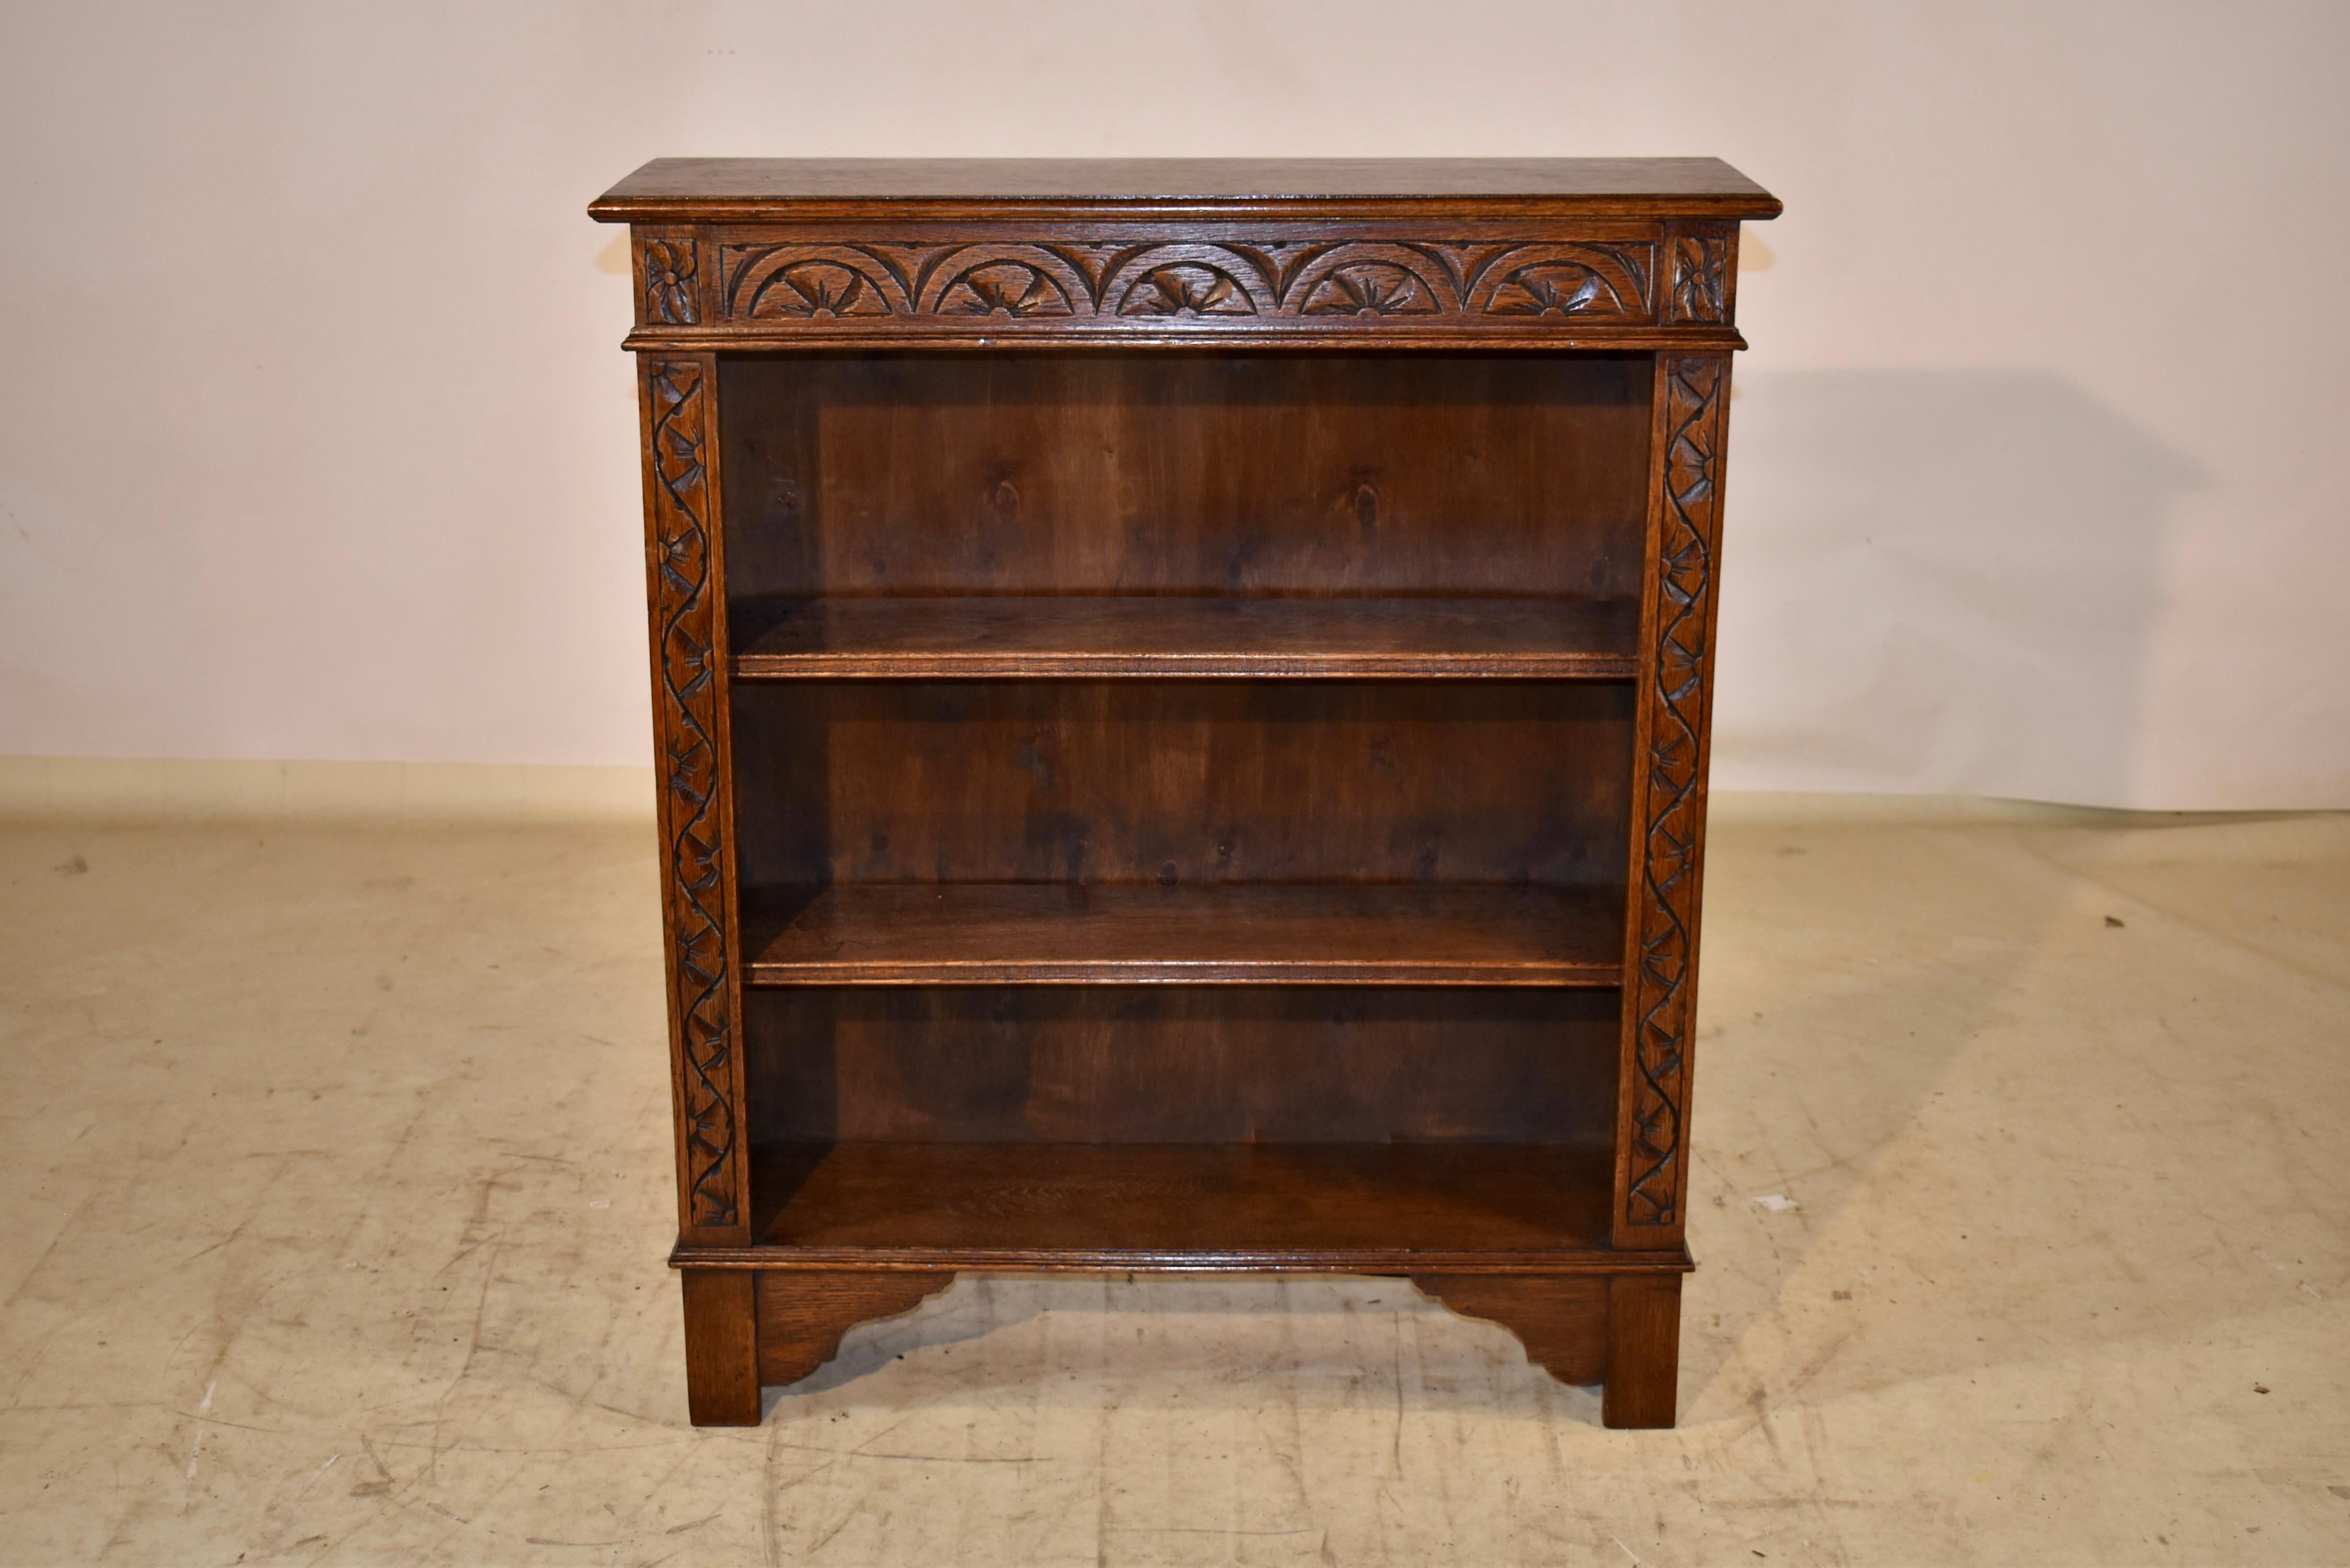 Edwardian oak bookcase from England.  The top has a beveled edge, following down to simple sides and three moveable shelves.  The front of the case has hand carved decoration at the top apron and both sides flanking the shelves.  The case is